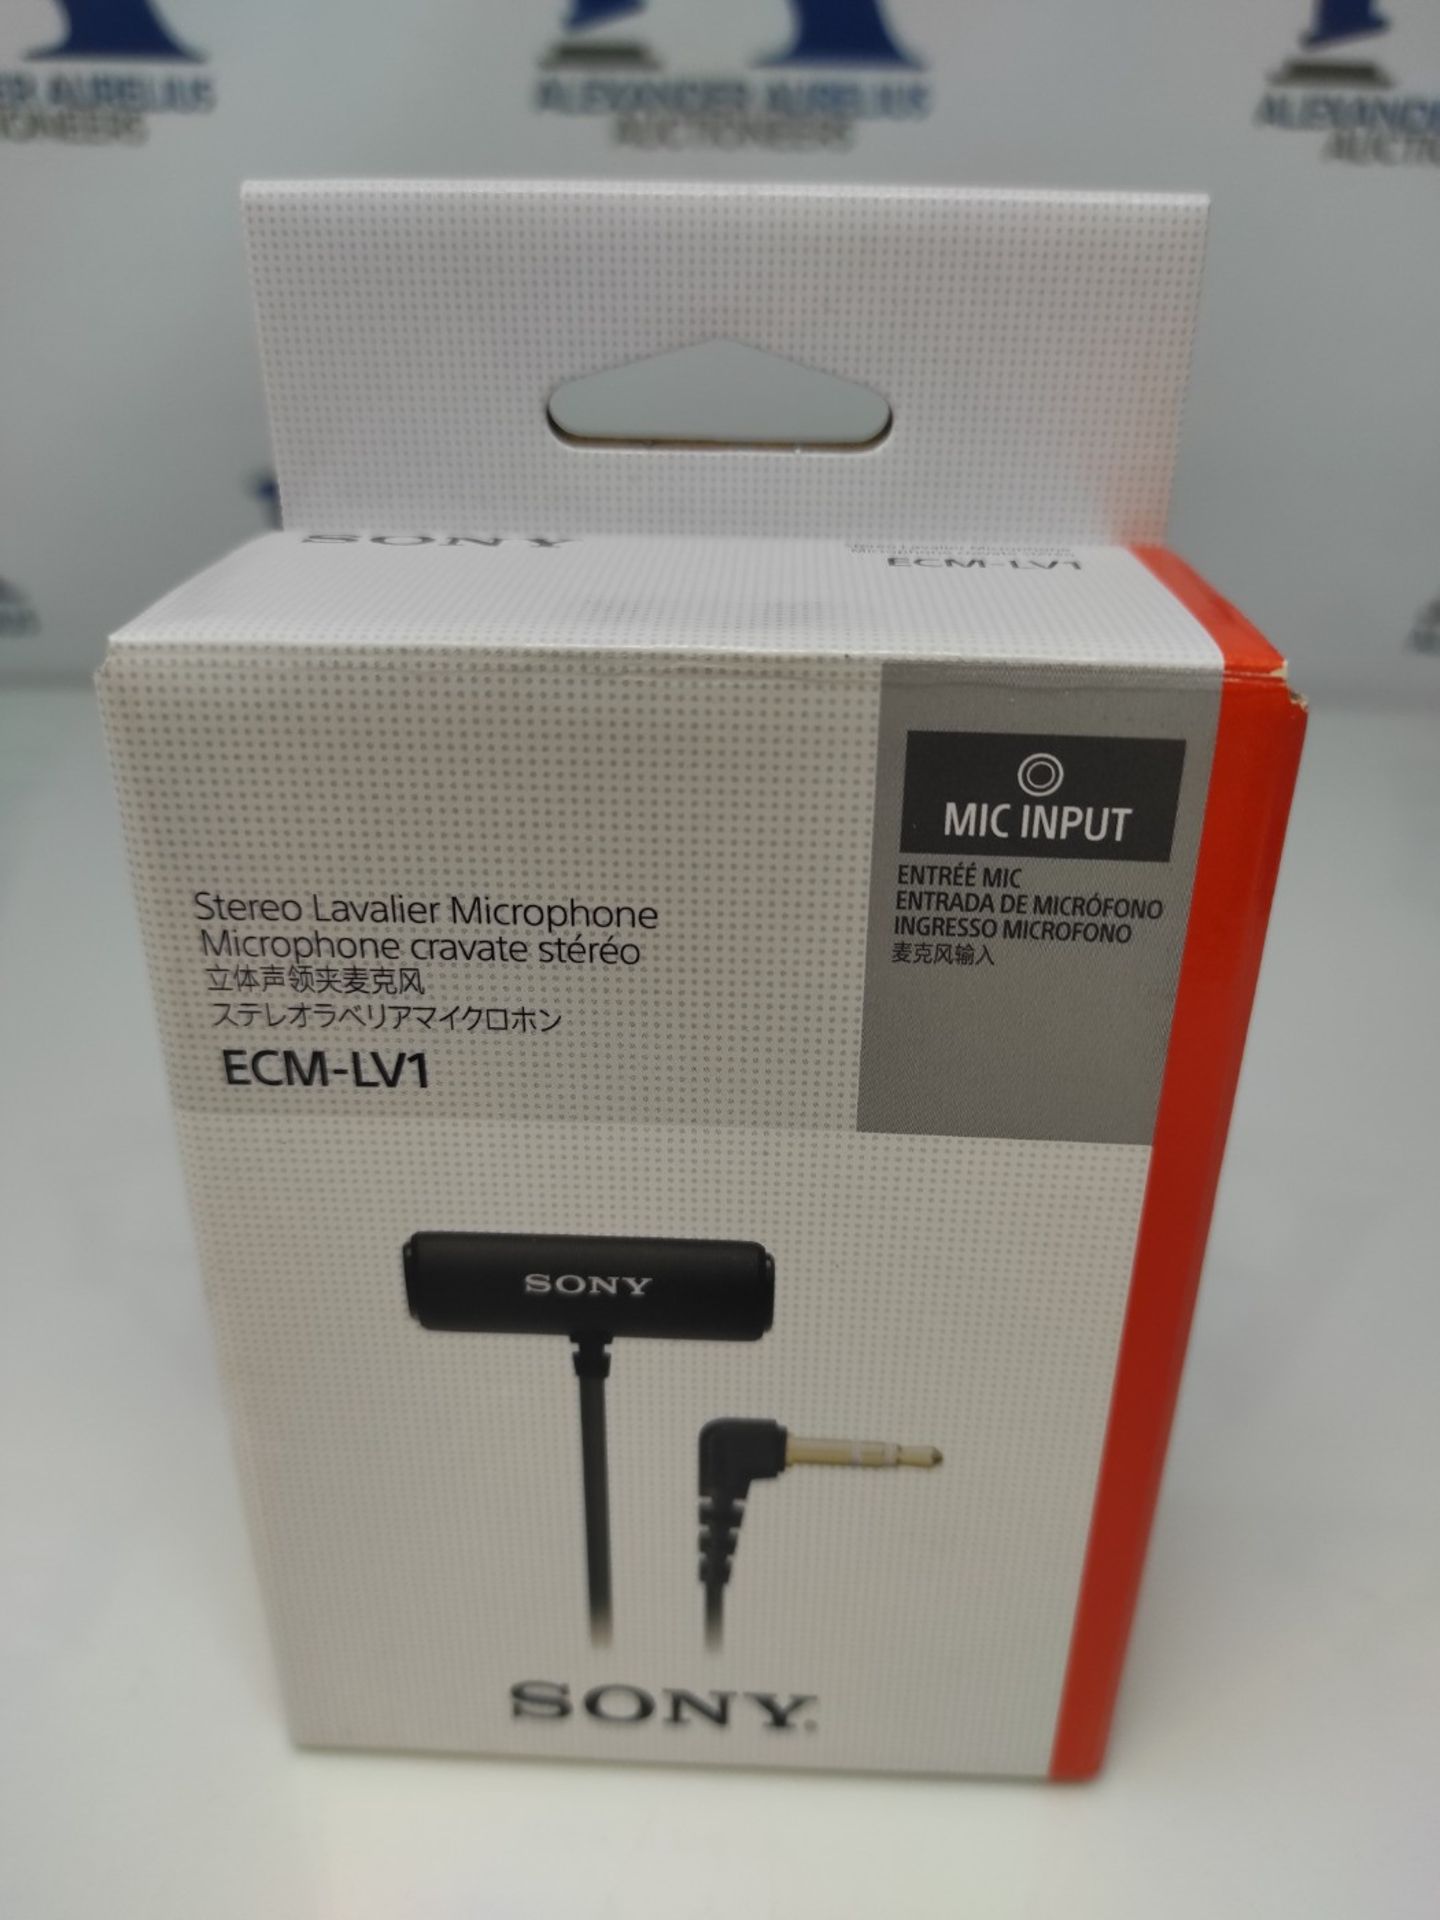 Sony ECM-LV1 - Lavalier Microphone with Stereo Sound Capture, 360° Clothing Clip, for - Image 2 of 6